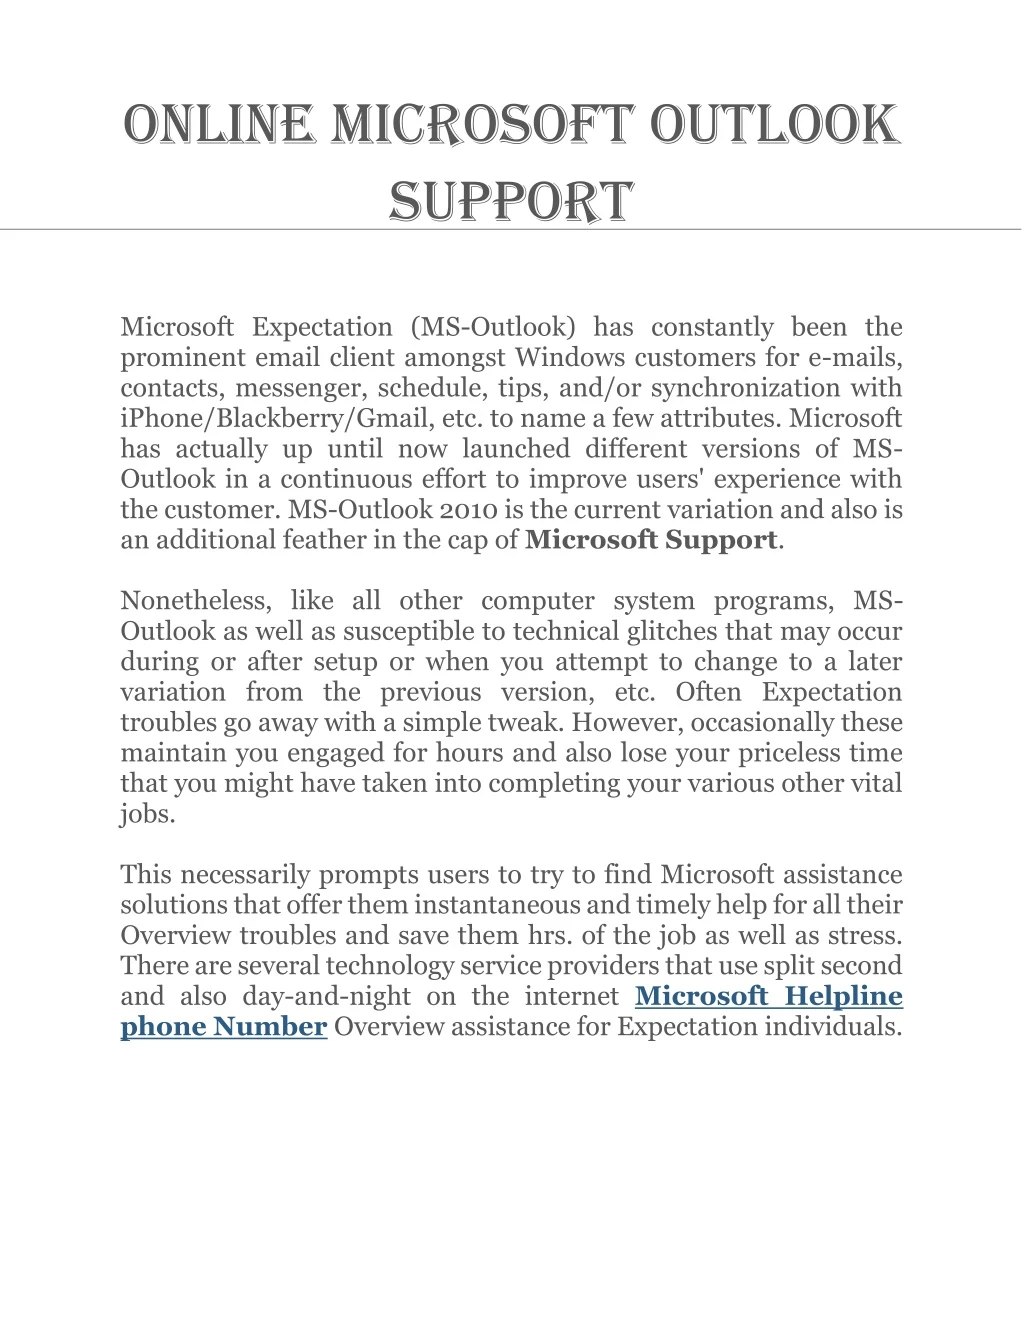 online microsoft outlook support microsoft